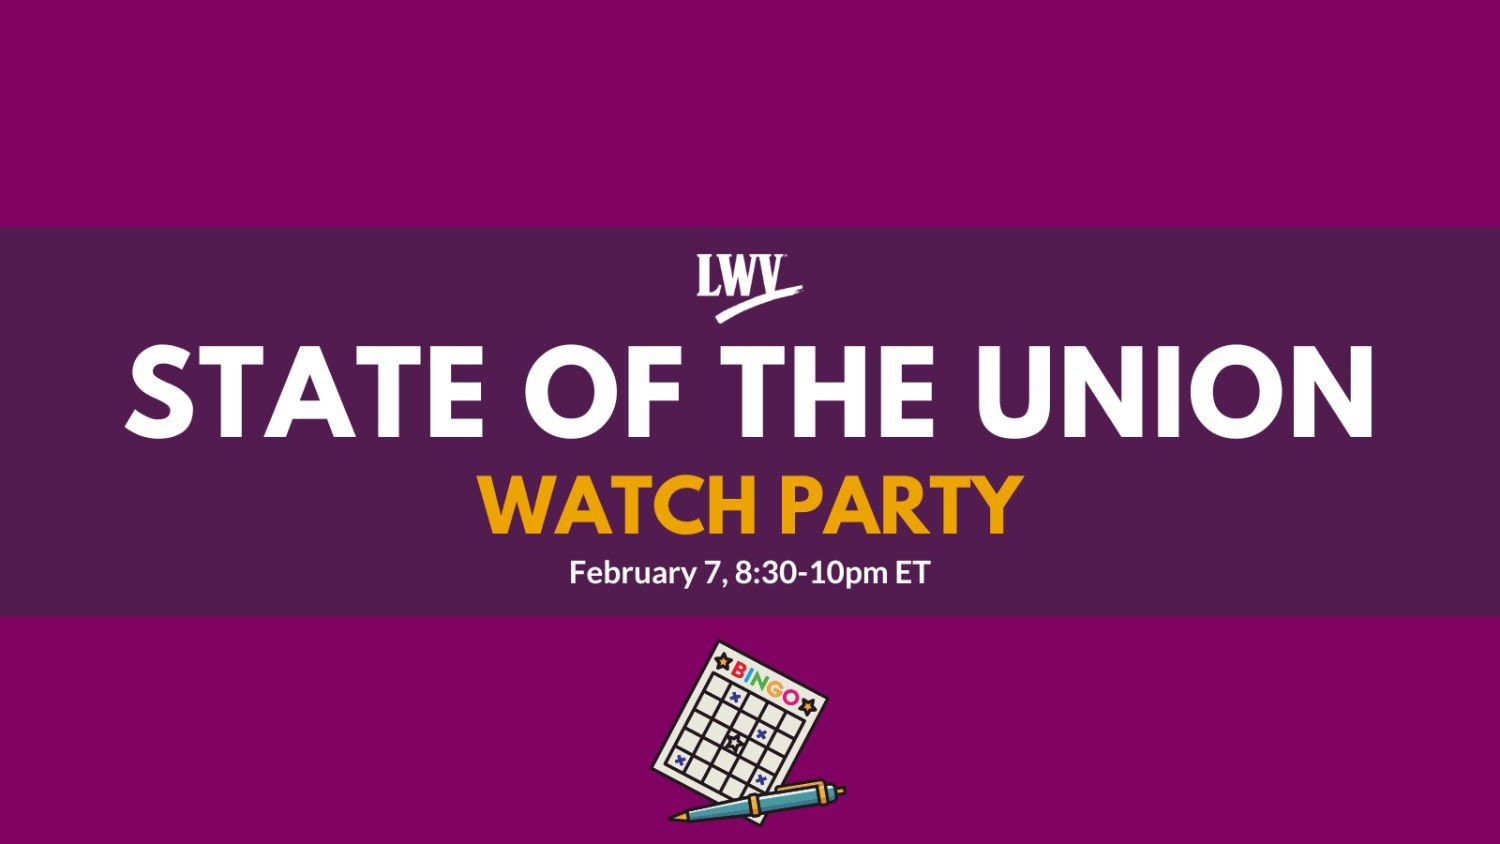 state of the union watchparty event image with purple background